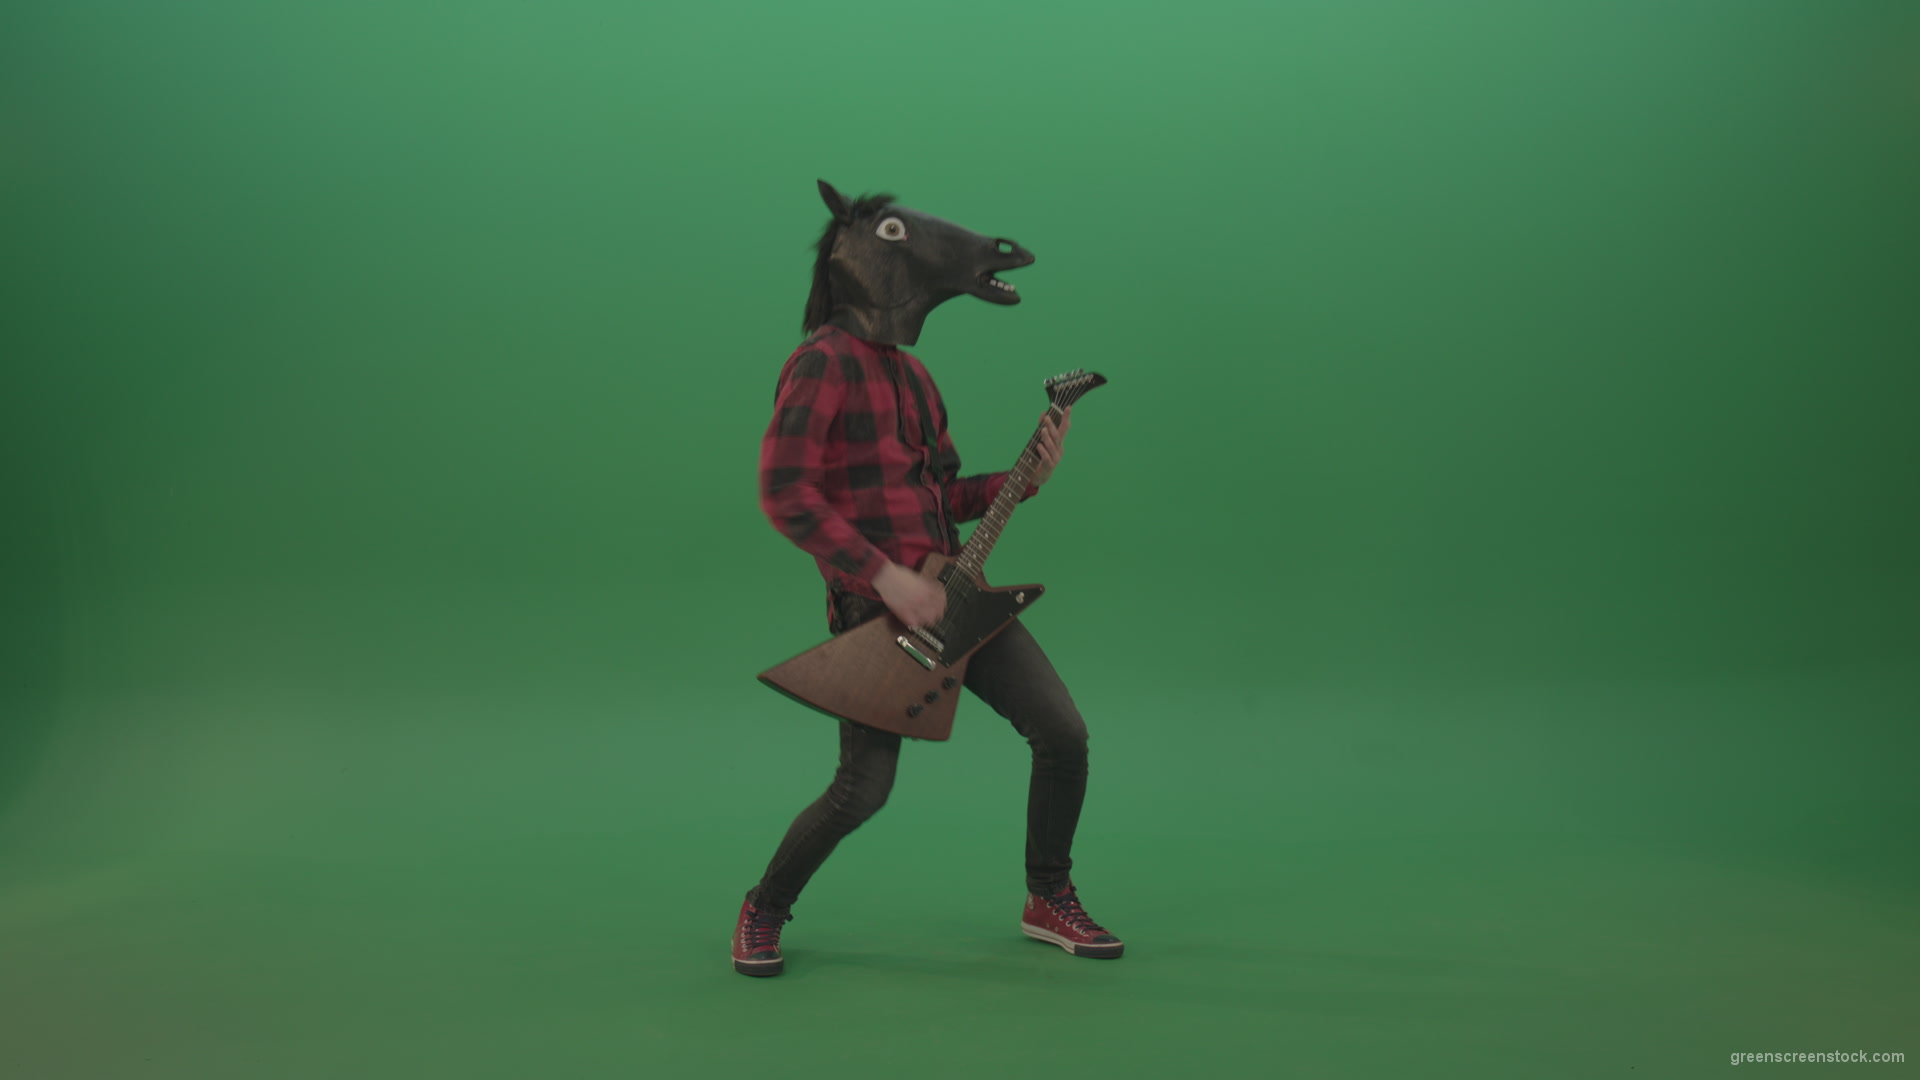 Guitarist-horse-man-with-horse-mask-head-play-guitar-on-green-screen_008 Green Screen Stock